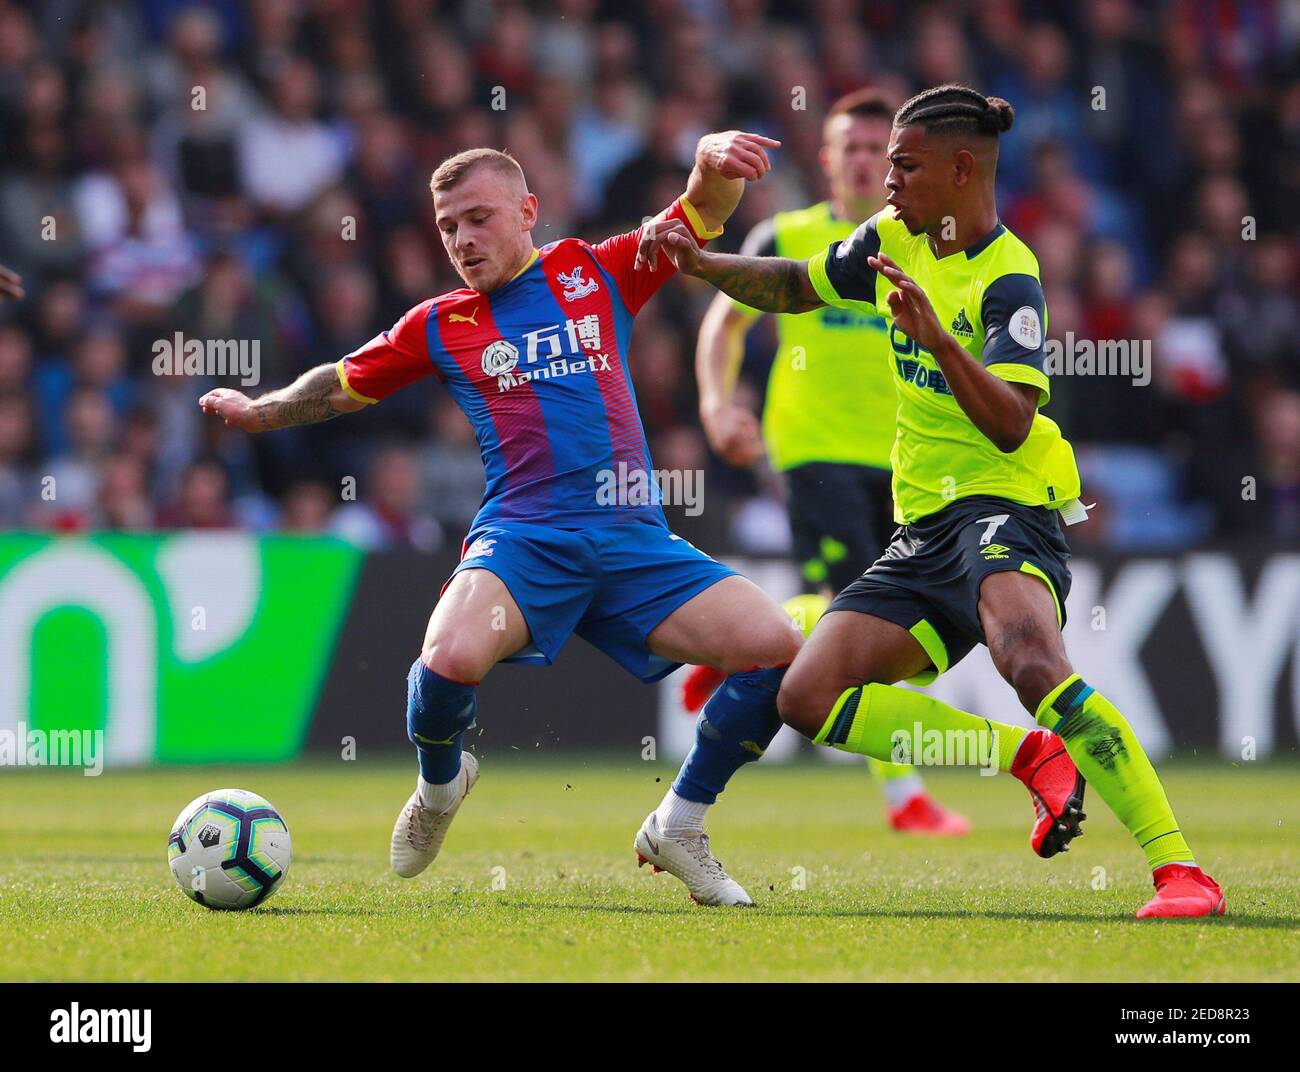 Soccer Football - Premier League - Crystal Palace v Huddersfield Town - Selhurst Park, London, Britain - March 30, 2019  Crystal Palace's Max Meyer in action with Huddersfield Town's Juninho Bacuna     Action Images via Reuters/Andrew Couldridge  EDITORIAL USE ONLY. No use with unauthorized audio, video, data, fixture lists, club/league logos or 'live' services. Online in-match use limited to 75 images, no video emulation. No use in betting, games or single club/league/player publications.  Please contact your account representative for further details. Stock Photo